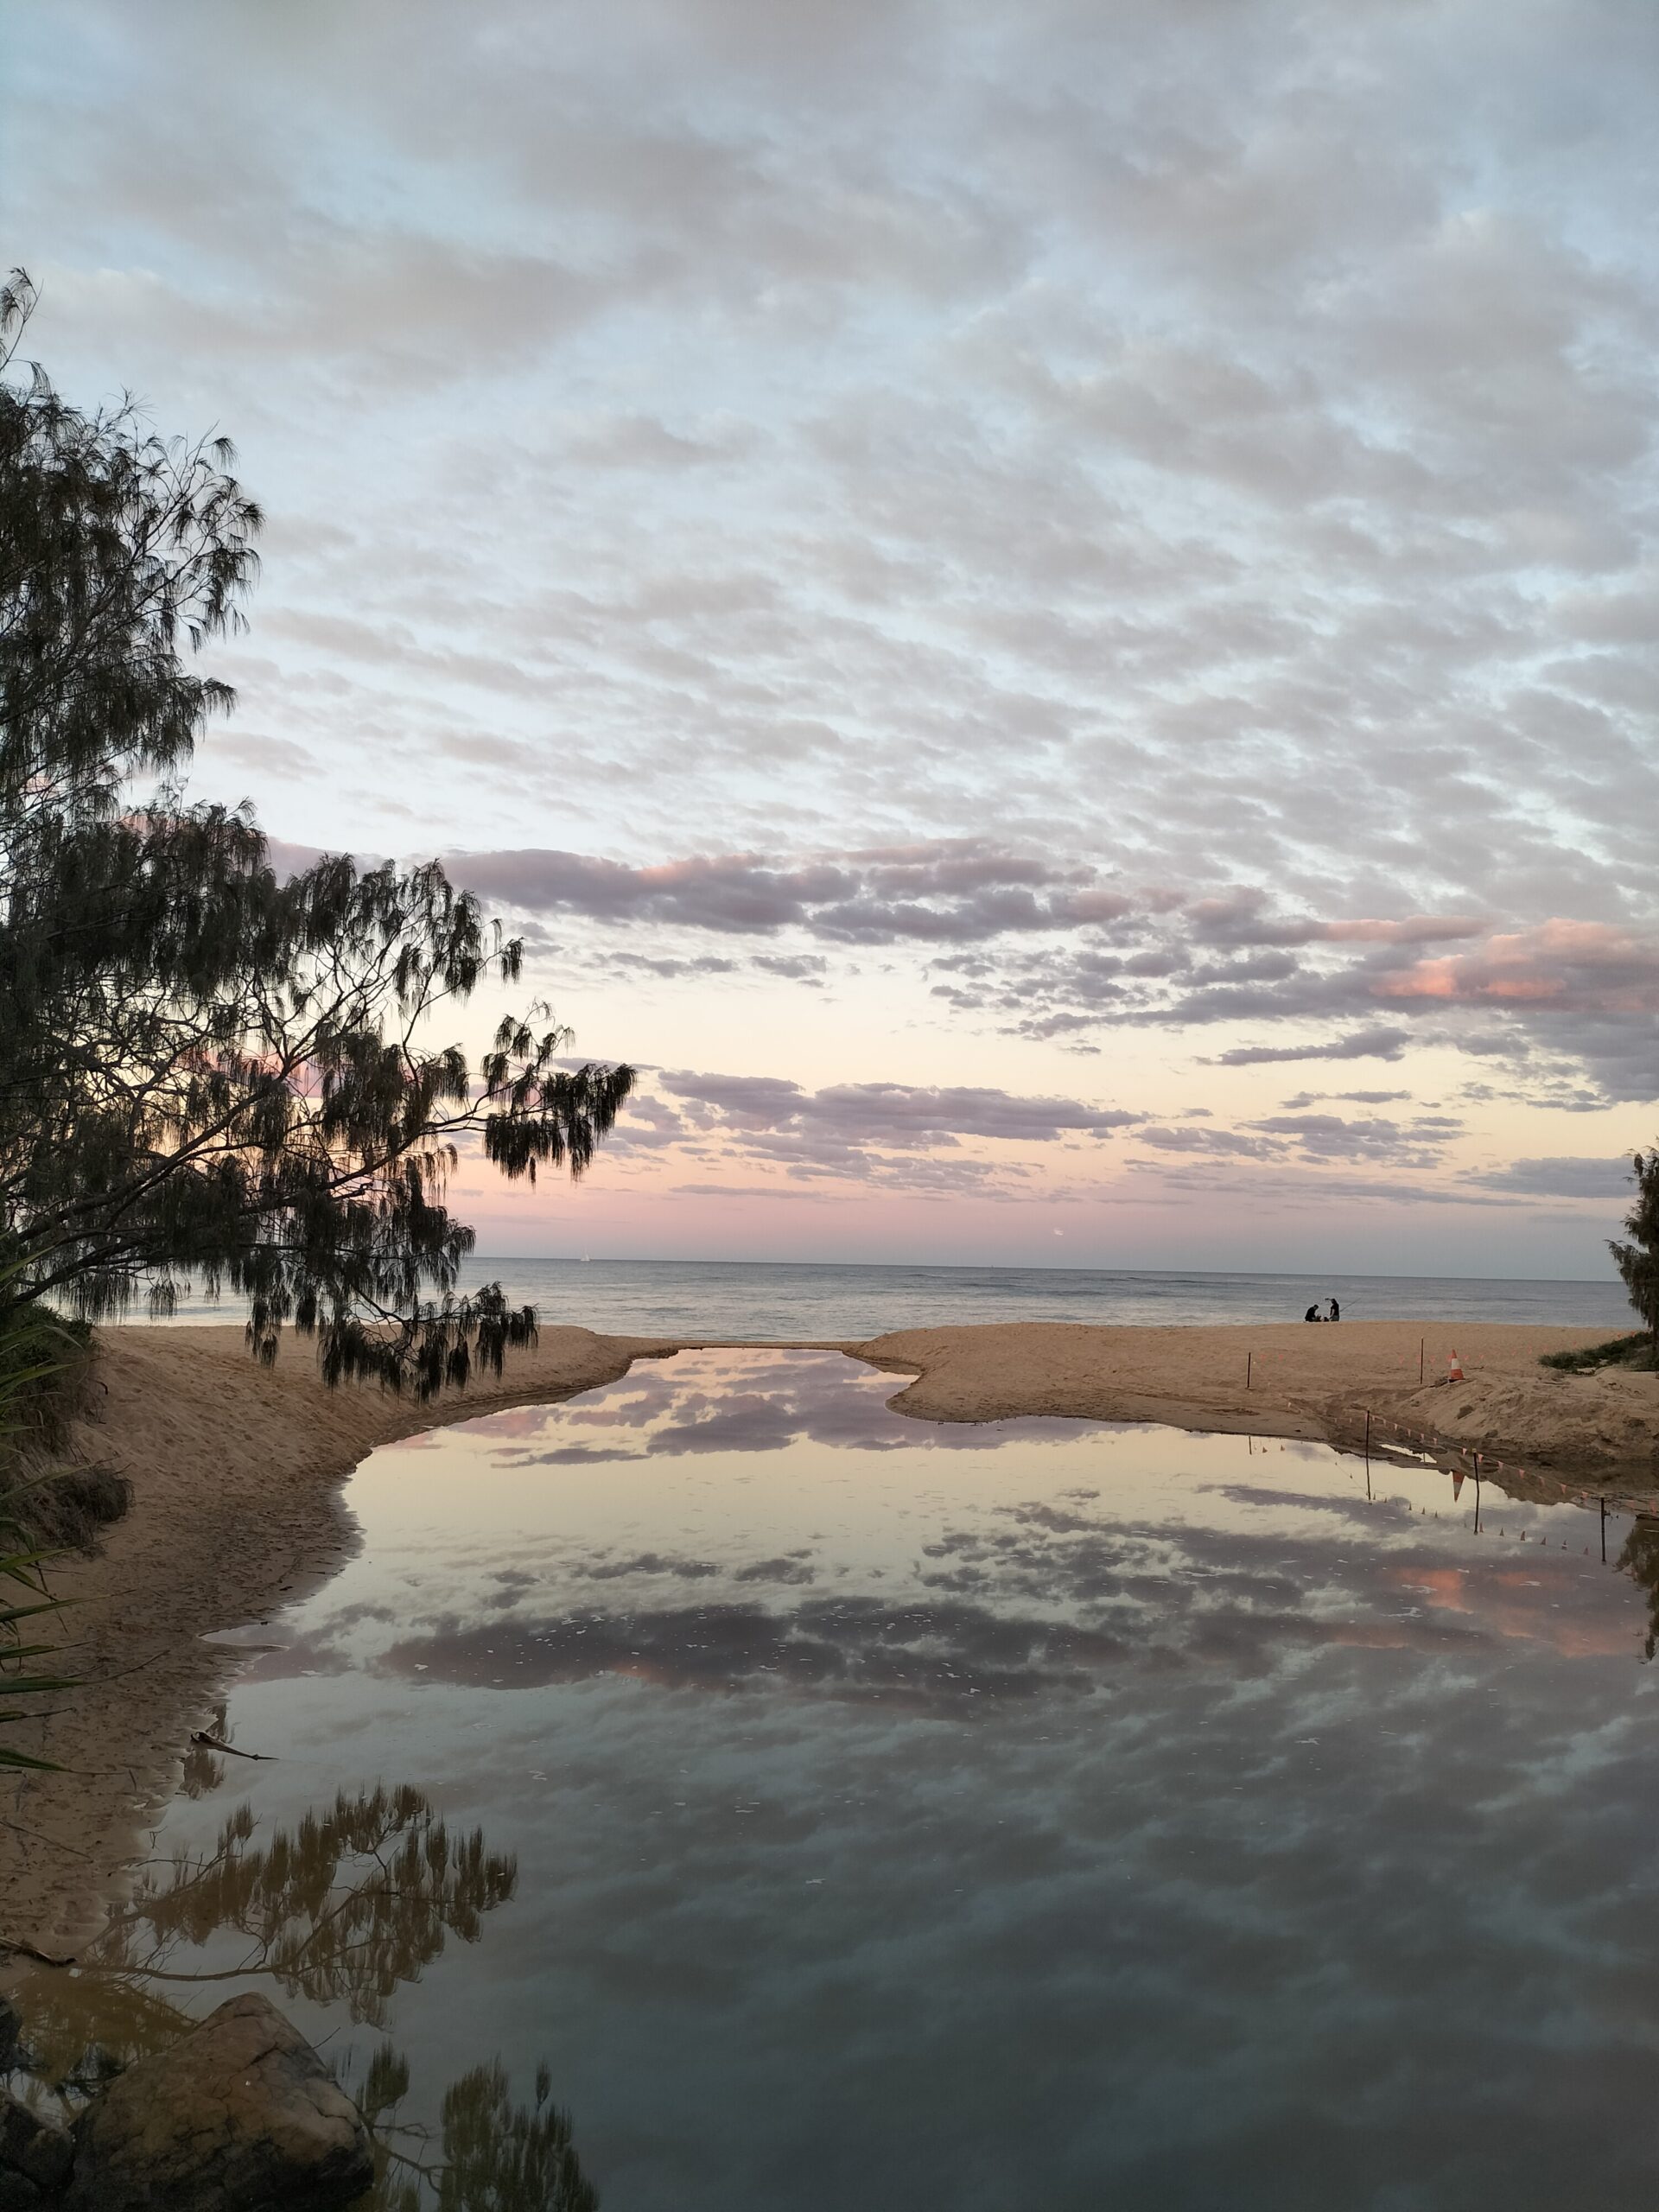 dicky beach at sunset queensland